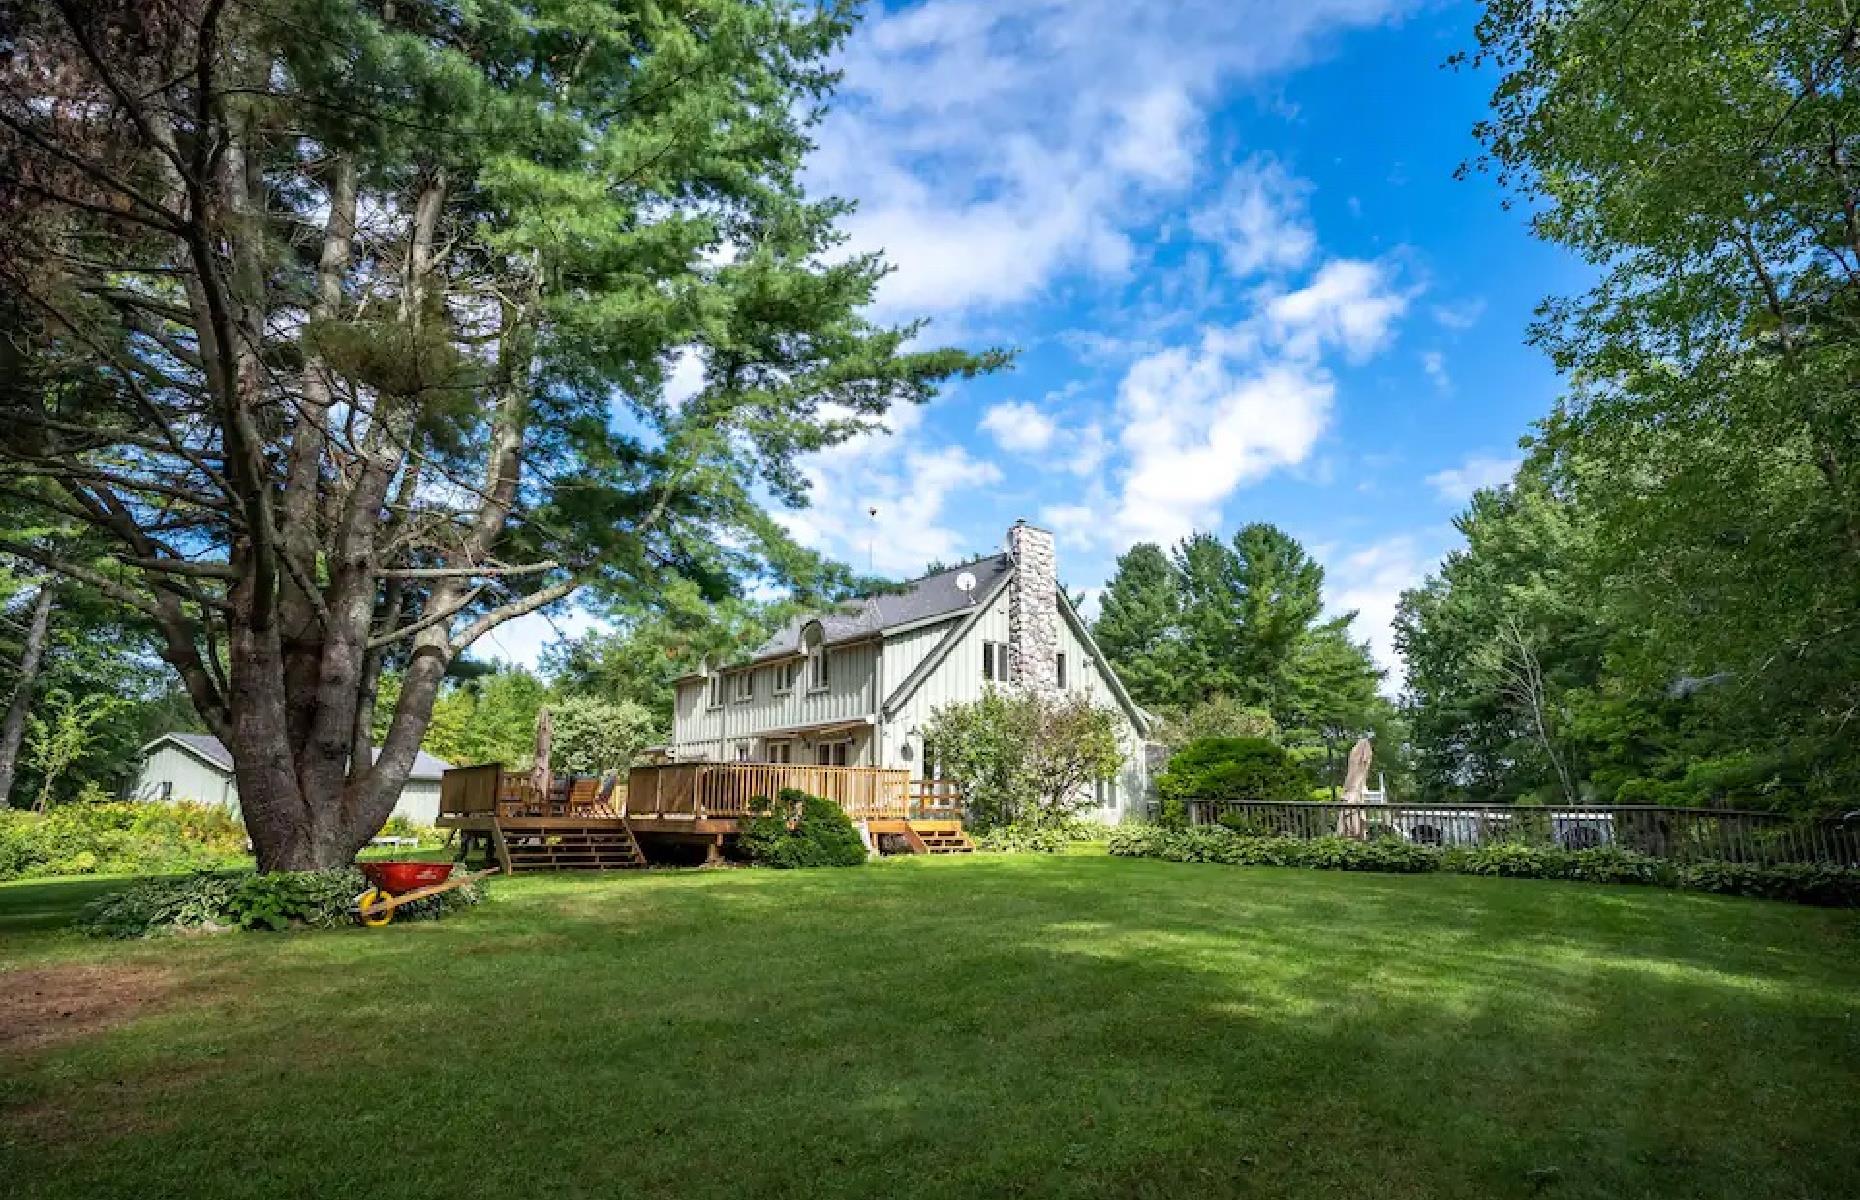 <p>It’s not often you find a property that offers the laid-back pace of farm life along with calming waterfront views of the Crowe River. This <a href="https://www.airbnb.co.uk/rooms/43371186?adults=1&category_tag=Tag%3A8175&children=0&infants=0&check_in=2022-09-11&check_out=2022-09-16&federated_search_id=39a2ce82-f294-4c23-92c8-bfe11c4229de&source_impression_id=p3_1662842344_pgshGv%2BtUR0VE48u">rural lakeside retreat</a> gives visitors plenty to do, with water sports, ping pong, a pool, hiking trails and horseback riding either on-site or a short drive away. The house and pastoral property are big enough for a full family retreat, sleeping up to 22 guests in five bedrooms, with a full kitchen and complete privacy.</p>